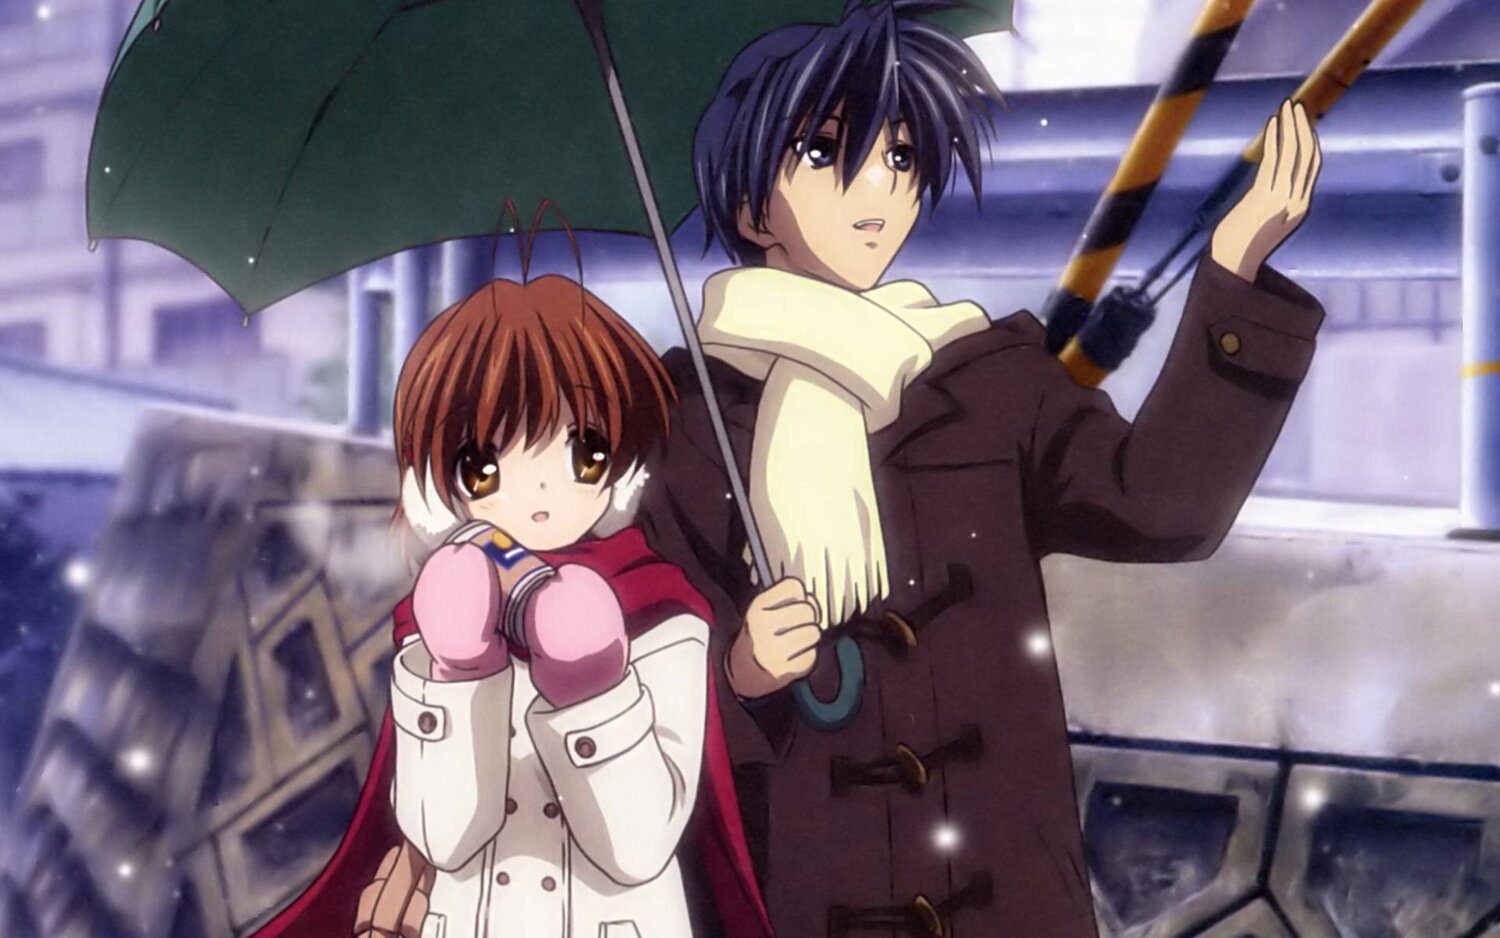 Characters appearing in Clannad Movie Anime